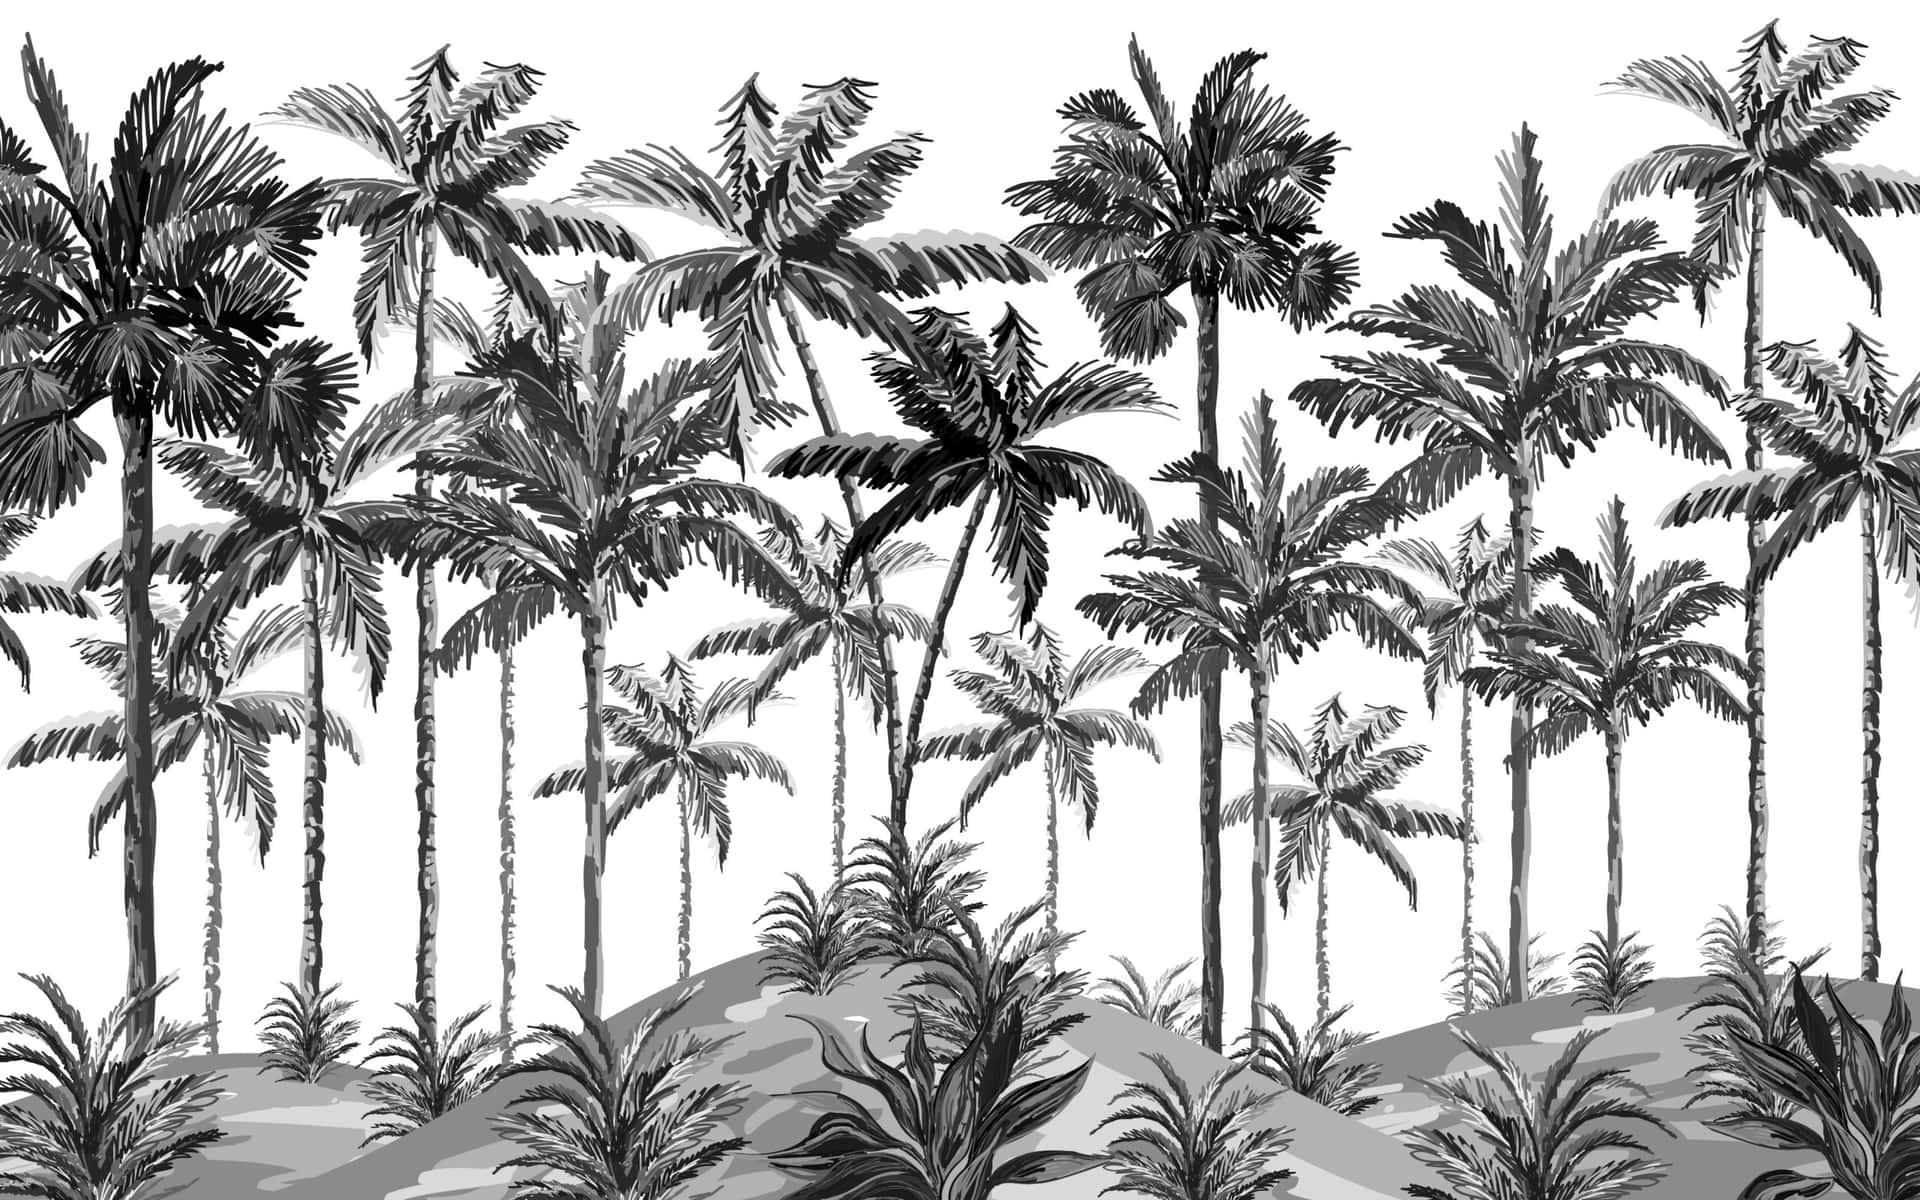 A stark contrast between black and white casts a cool and calming palm tree silhouette Wallpaper